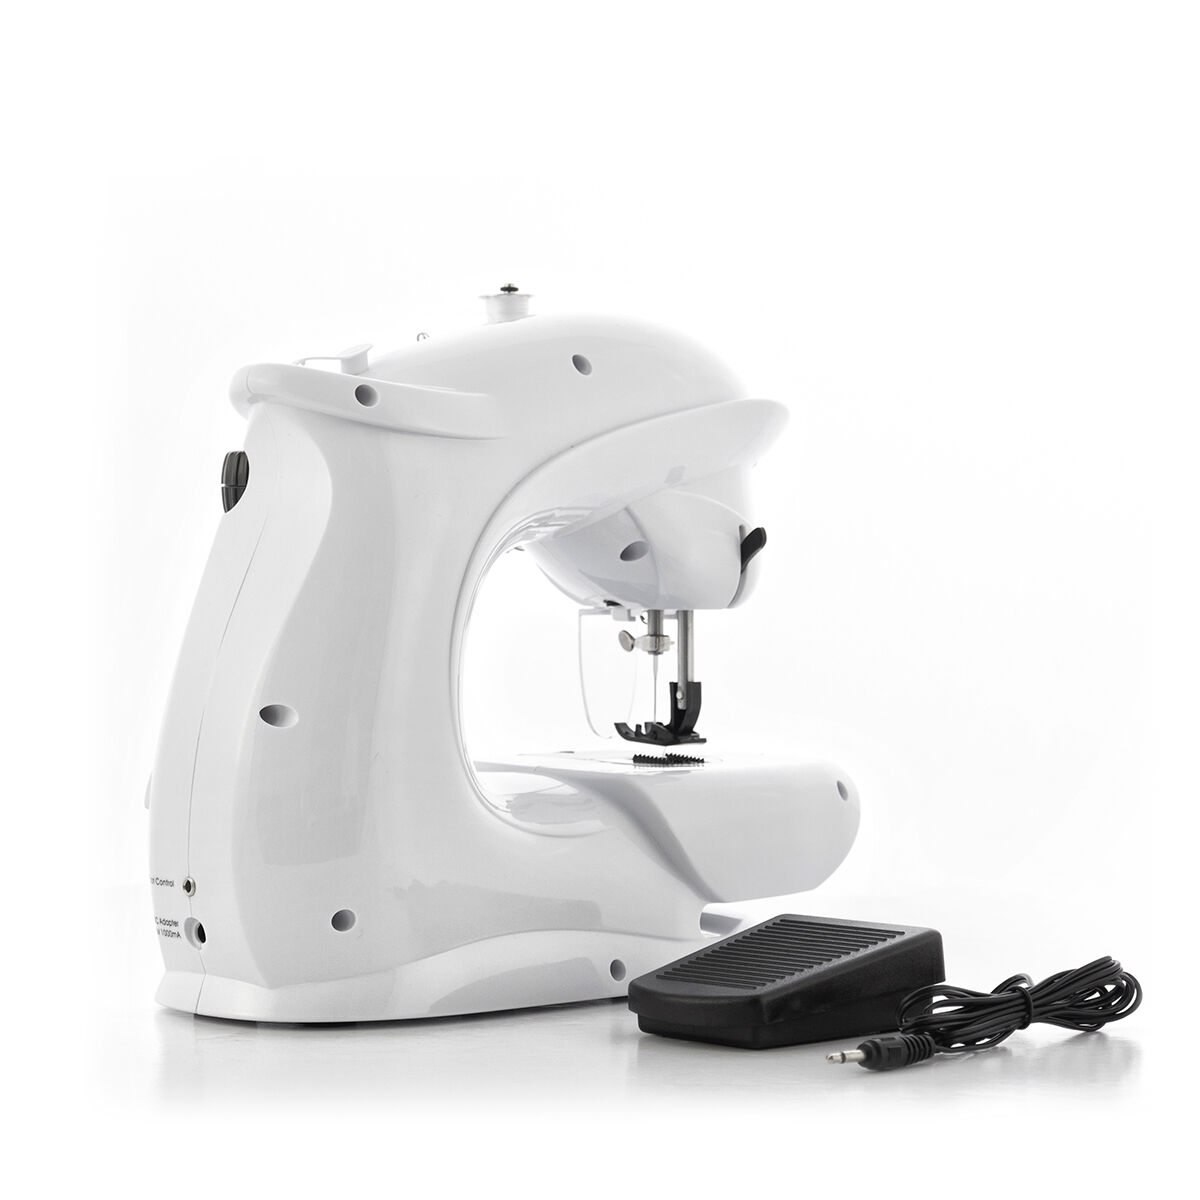 InnovaGoods Compact Sewing Machine 6 V 1000 mA White